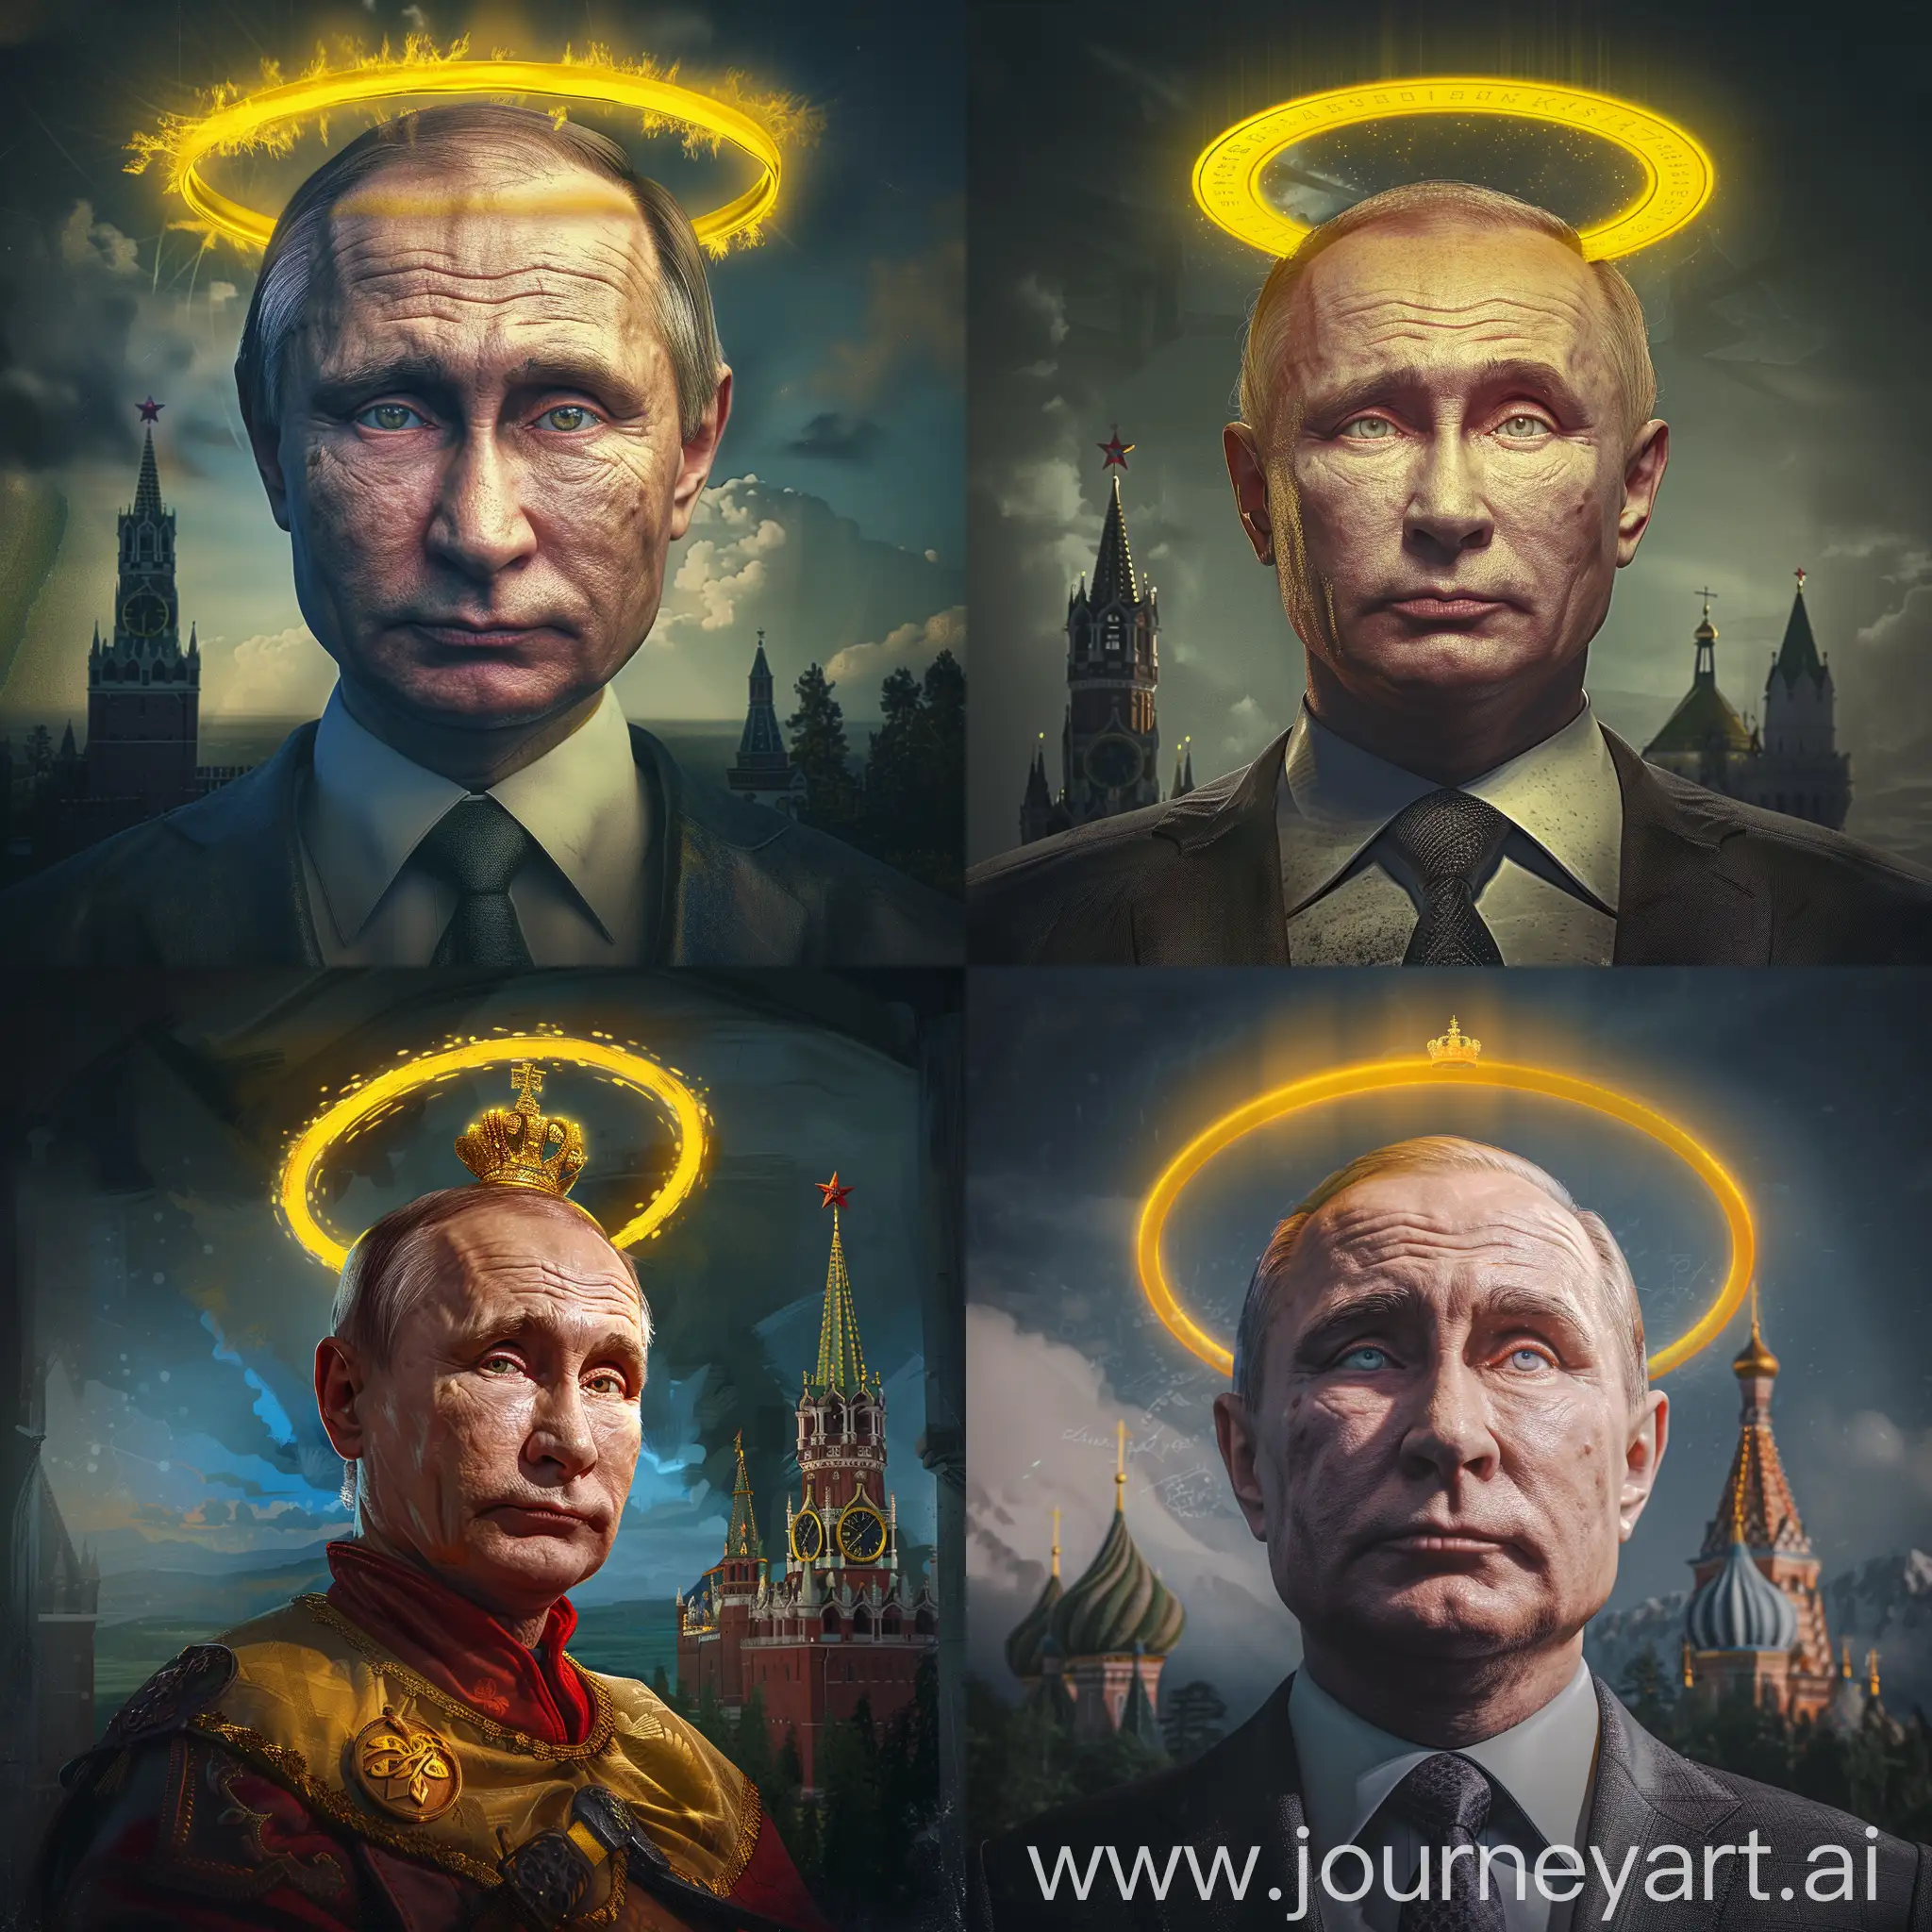 Vladimir-Putin-Portrayed-as-a-Tsar-with-a-Yellow-Halo-Against-Castle-Backdrop